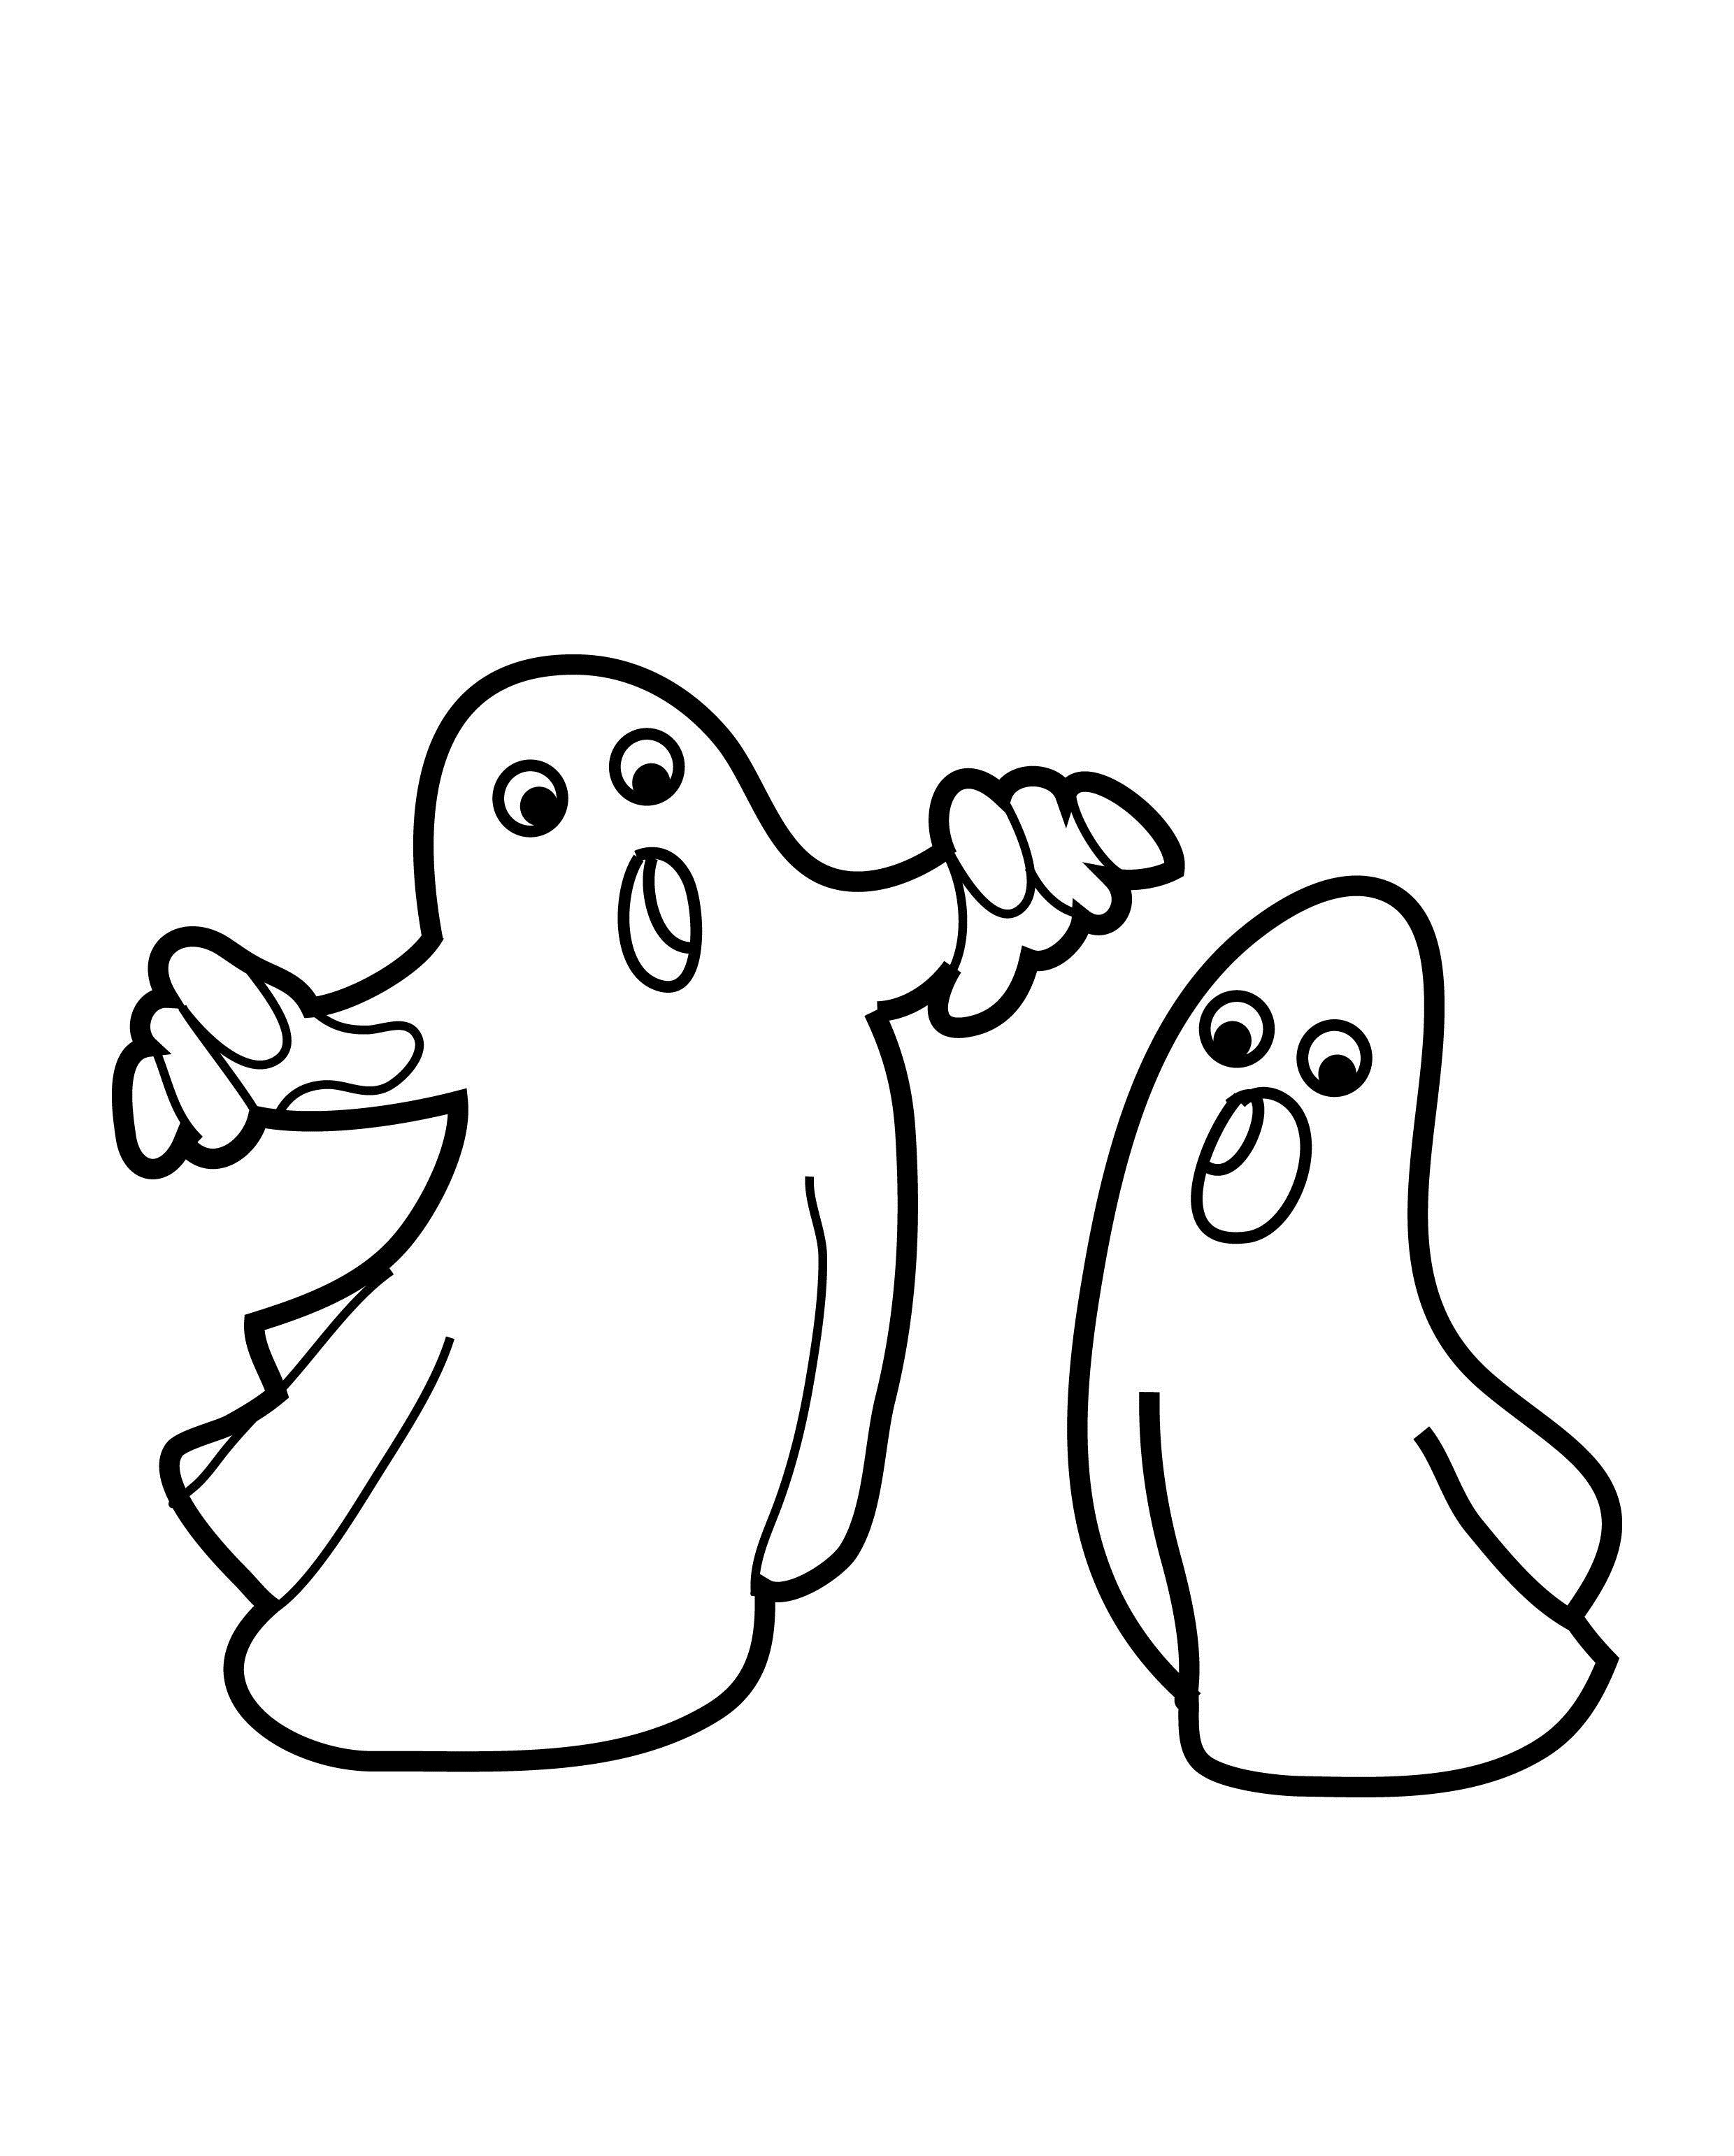 Halloween Ghost Coloring Pages Printables - Printable Word Searches